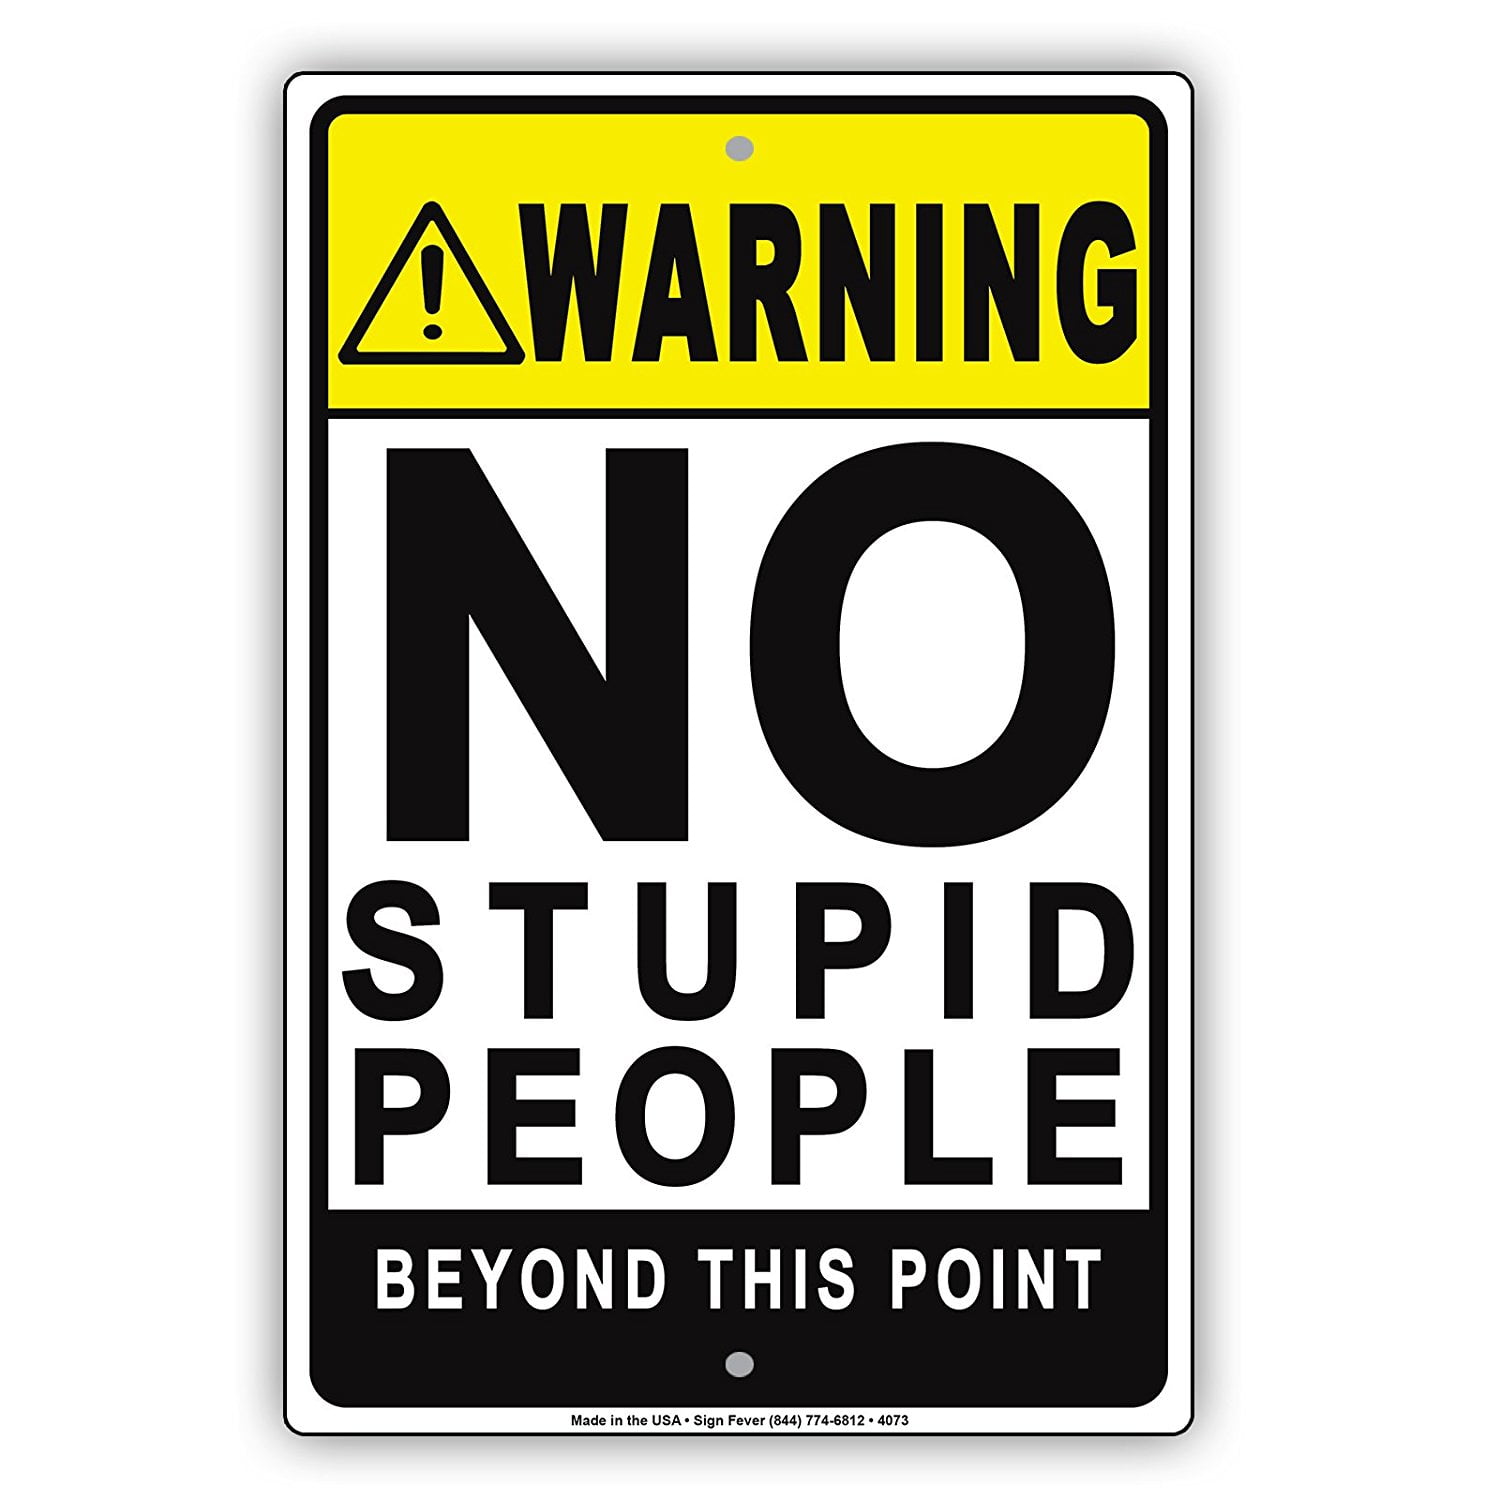 WARNING No Stupid People Beyond This Point Ridiculous Humor Funny Alert  Warning Aluminum Metal Sign 8